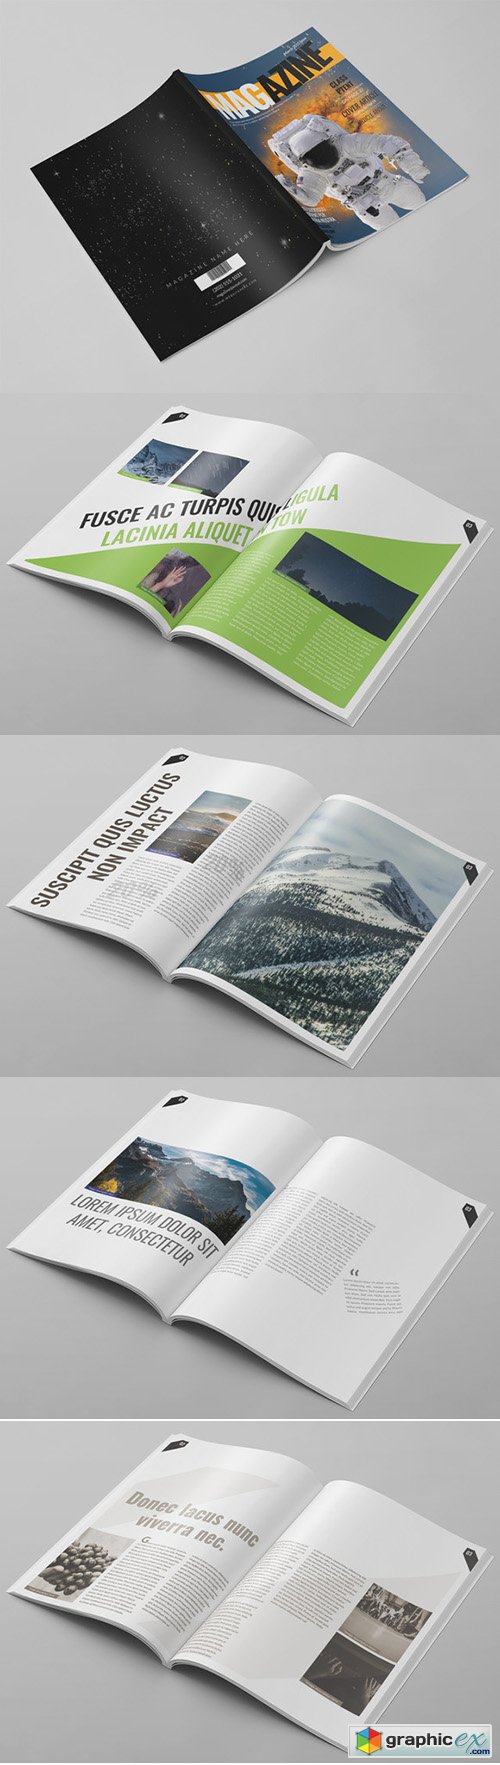  14 Pages Photoshop Magazine Template